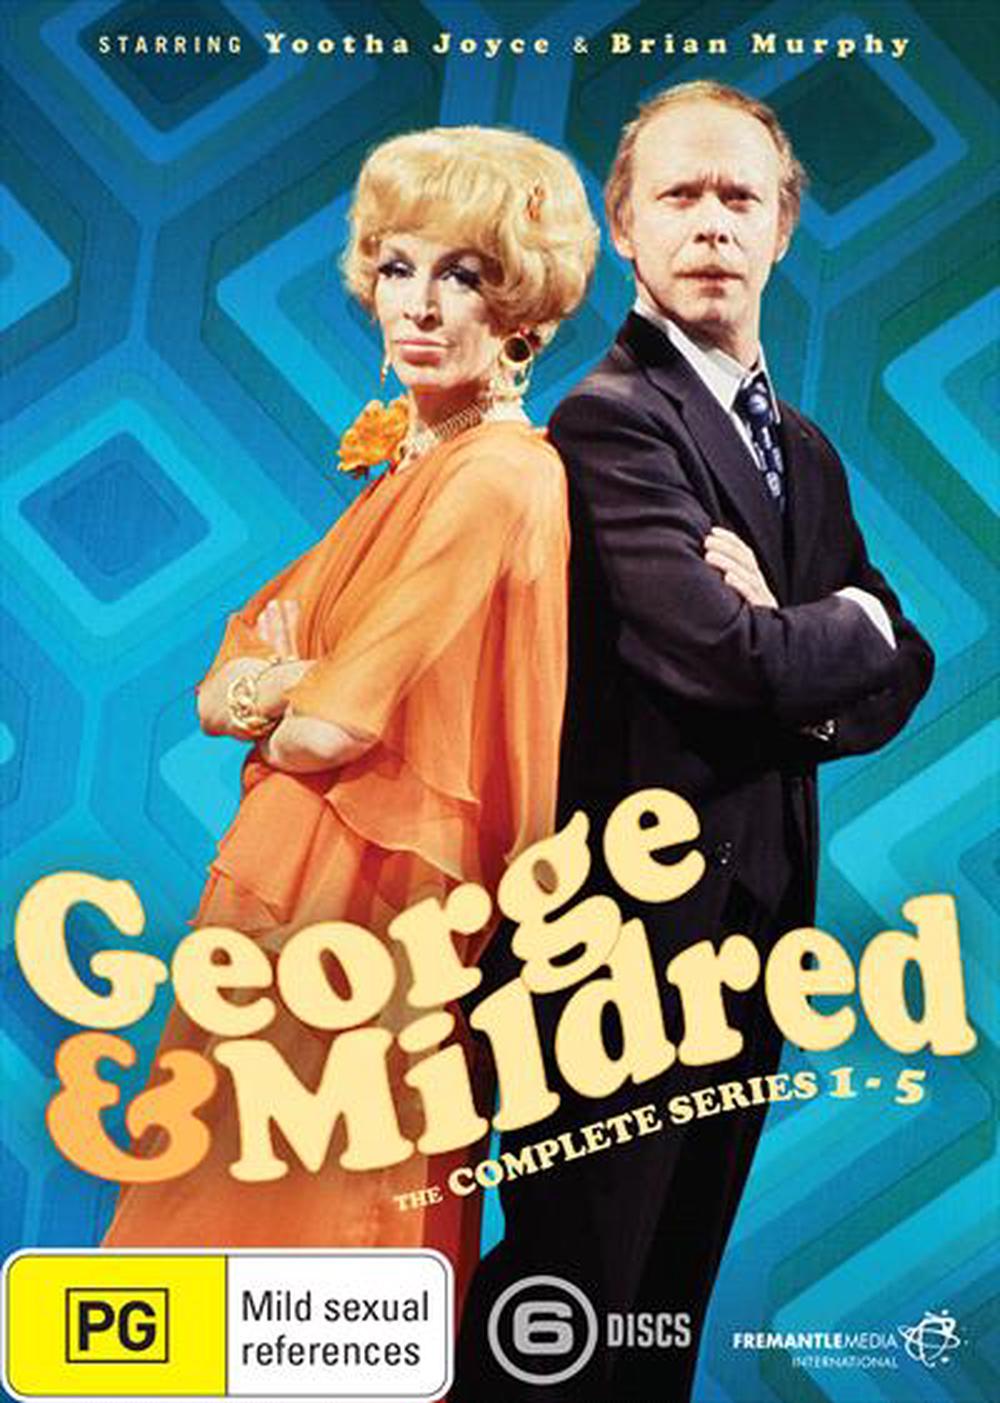 George And Mildred Series 1 5 Boxset Dvd Buy Online At The Nile 4757